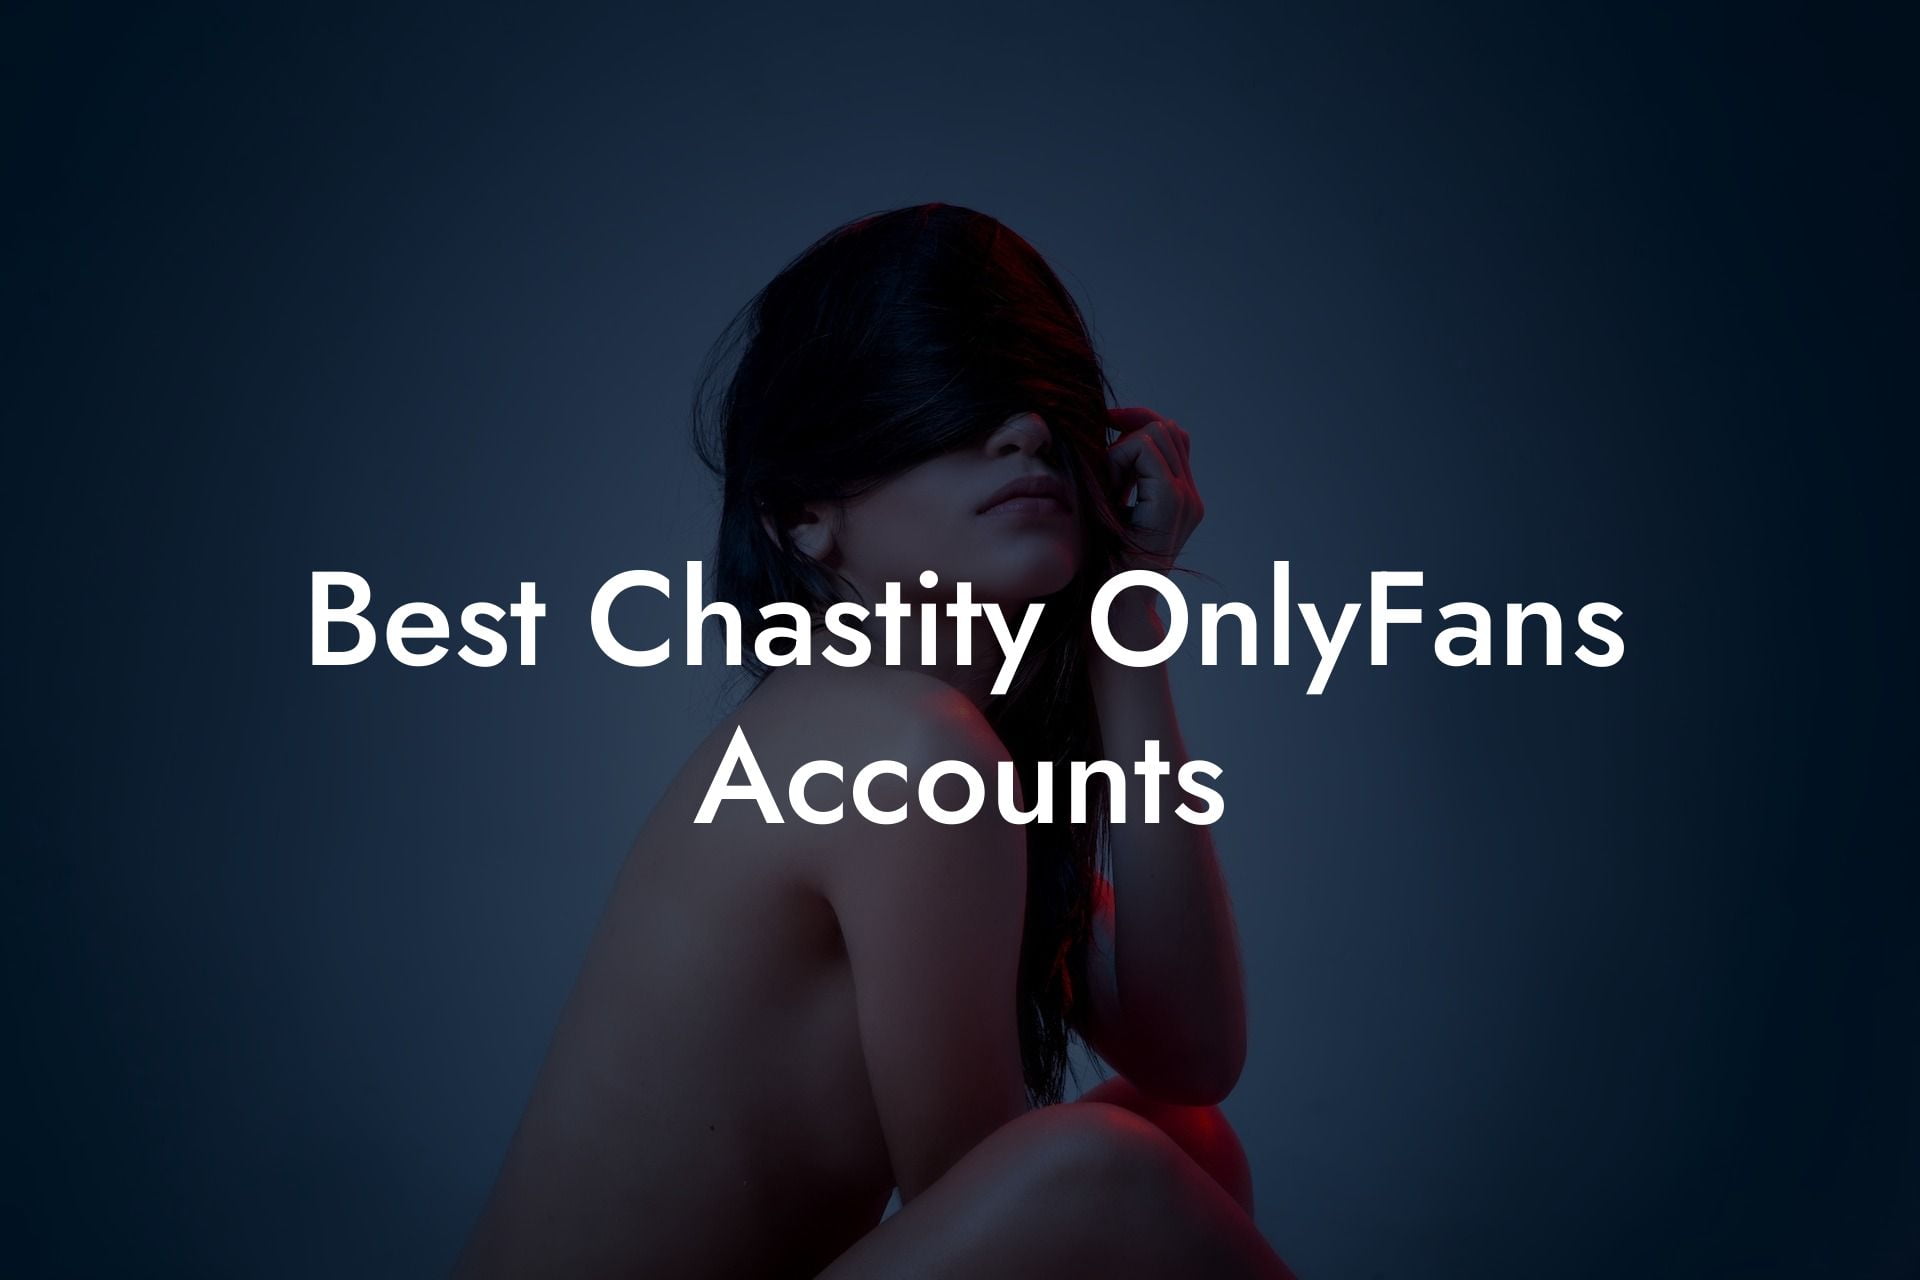 Best Chastity OnlyFans Accounts